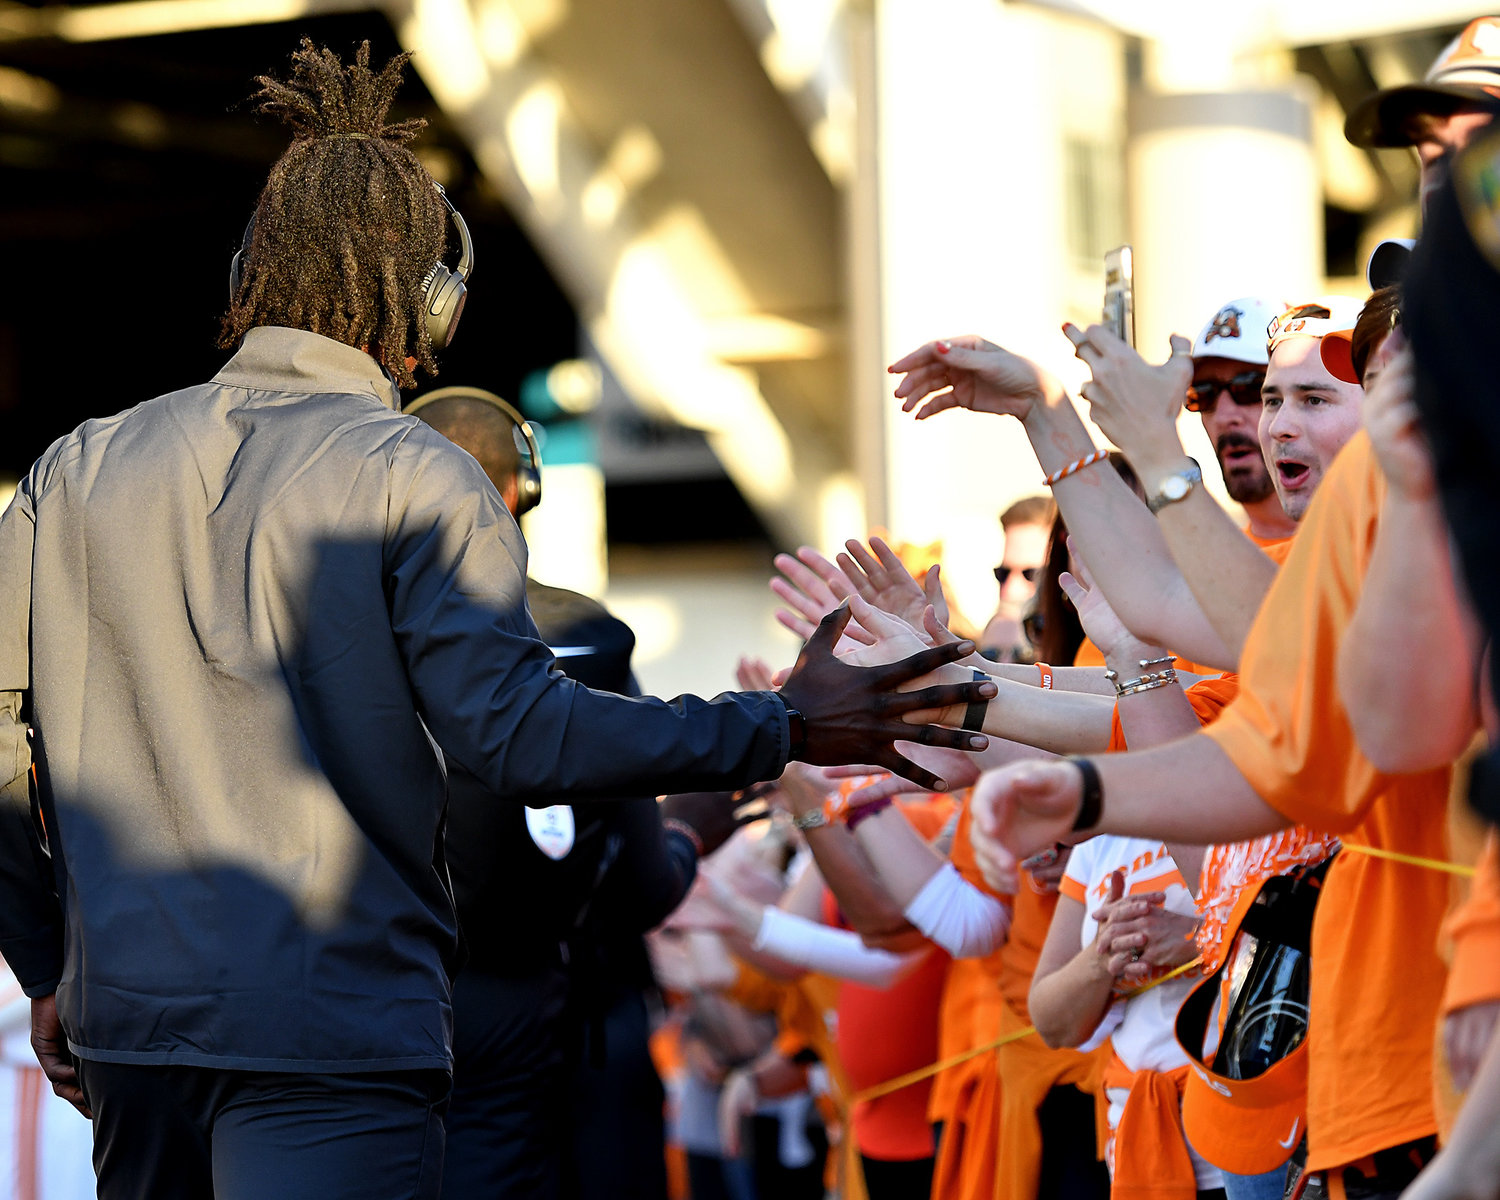 Tennessee Volunteers fans greet players and coaches as they arrive at TIAA Bank Field for the Gator Bowl NCAA football game against the Indiana Hoosiers Thursday, Jan. 2, 2020.